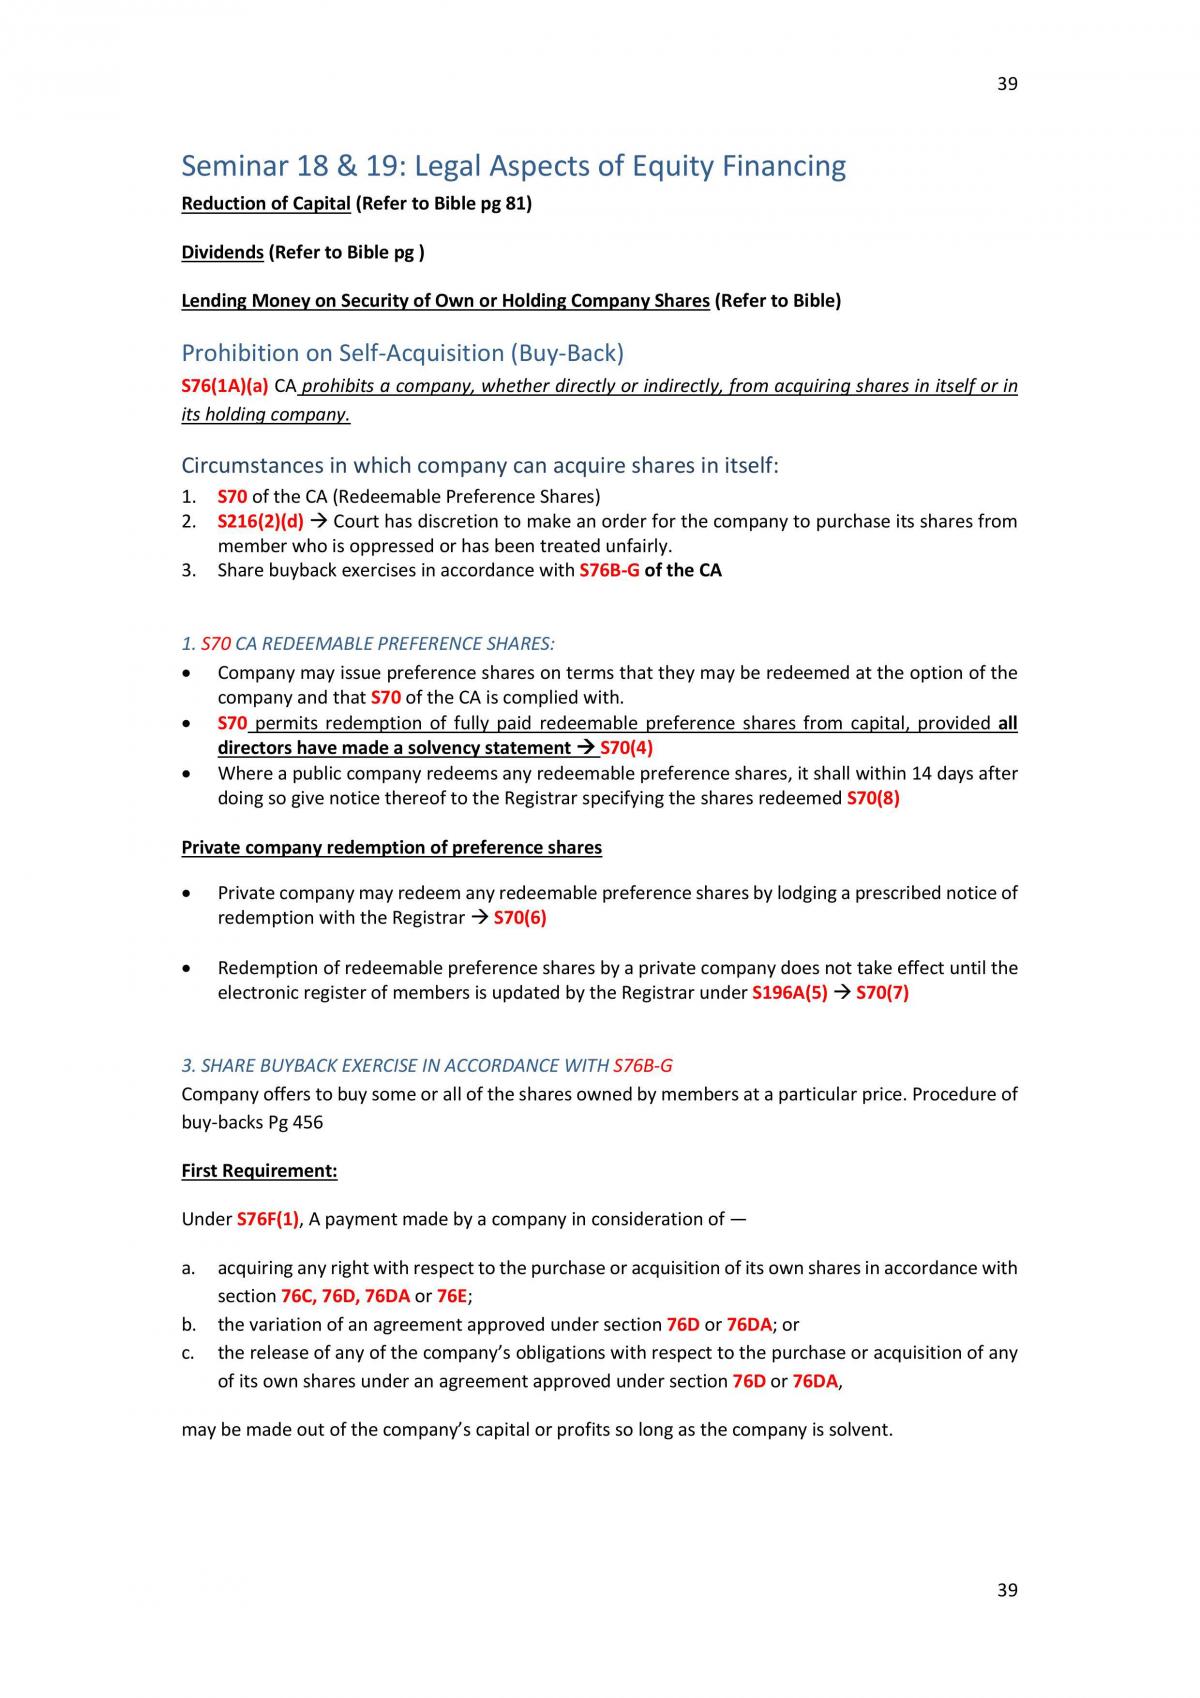 AC3203 Company Law and Corp Governance full notes - Page 39